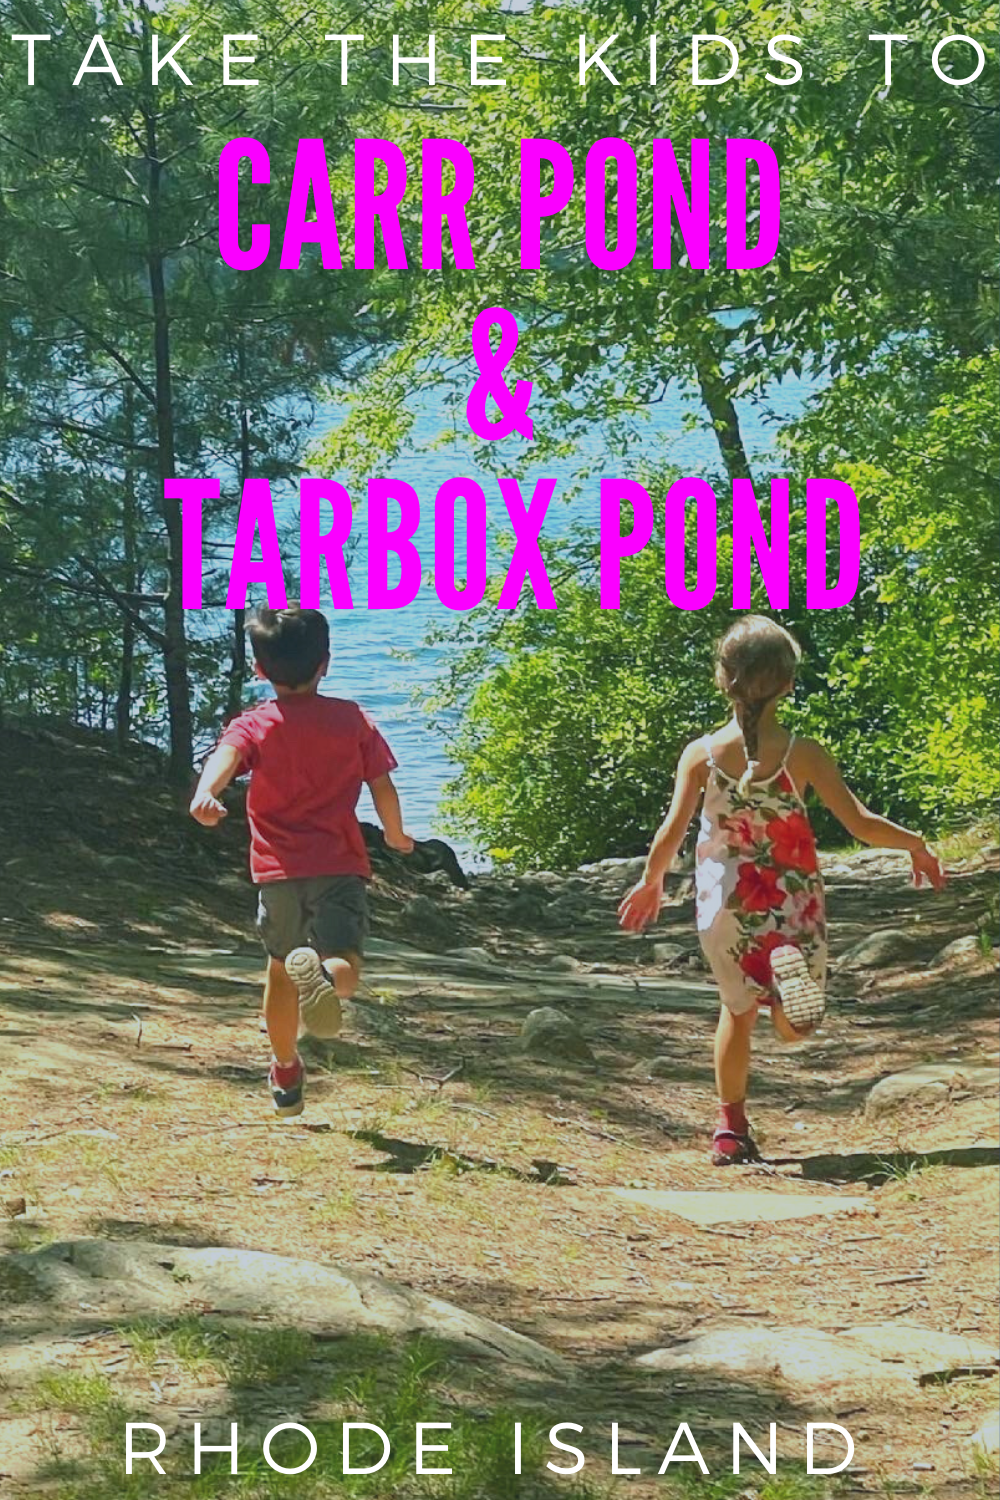 Carr Pond and Tarbox  in Rhode Island with kids